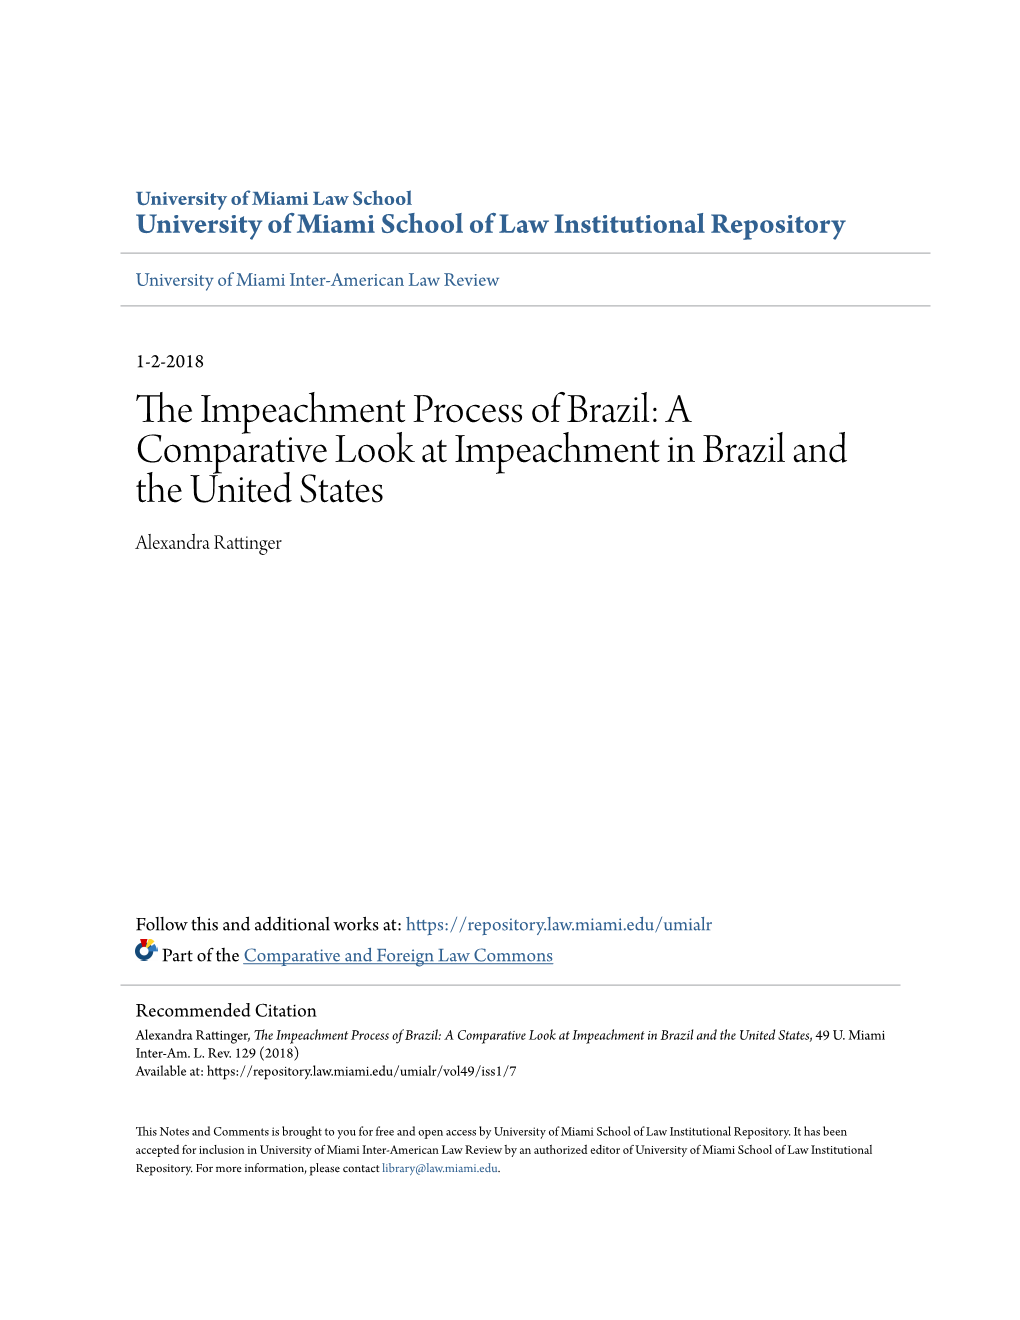 The Impeachment Process of Brazil: a Comparative Look at Impeachment in Brazil and the United States, 49 U